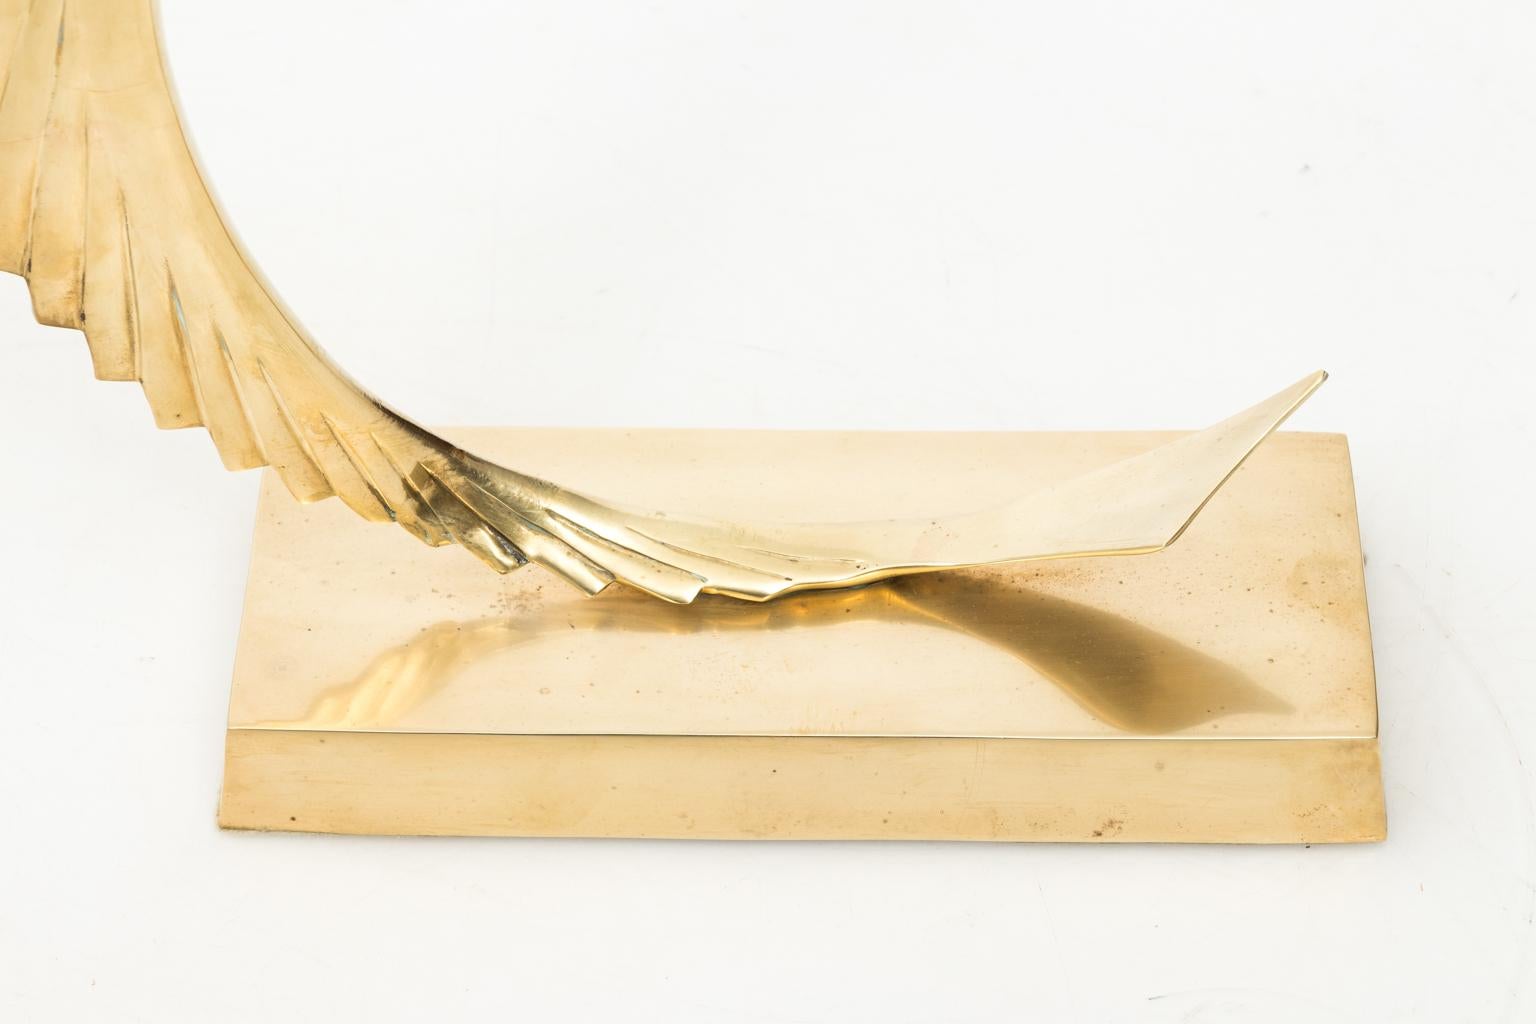 Solid brass marlin sculpture on base, circa 1960s.
 